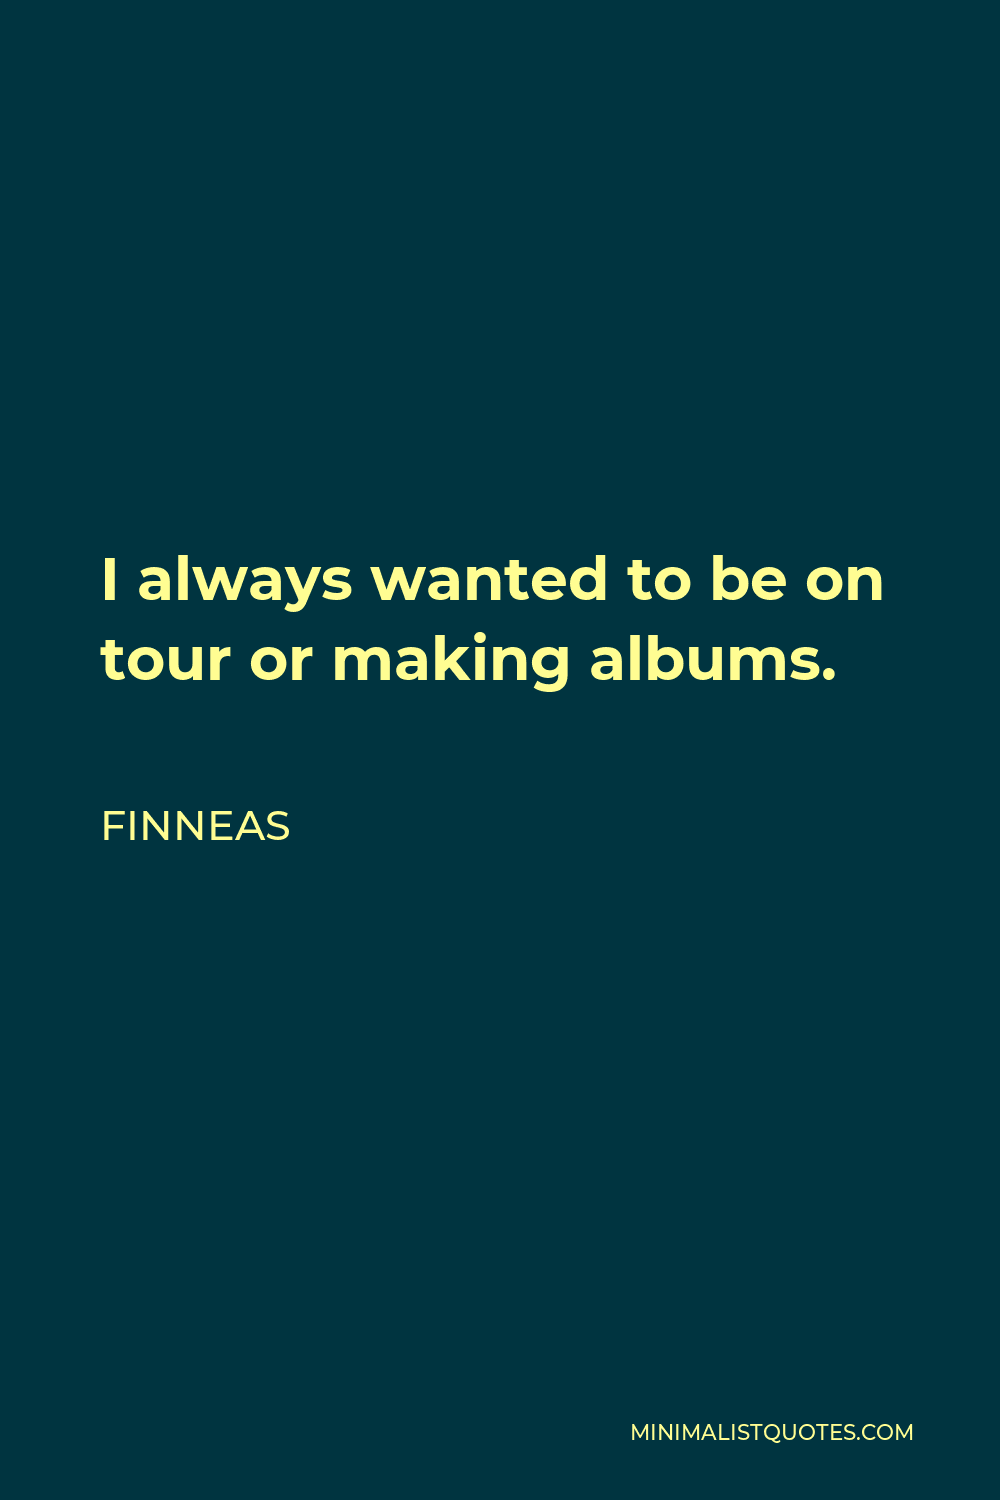 Finneas Quote - I always wanted to be on tour or making albums.